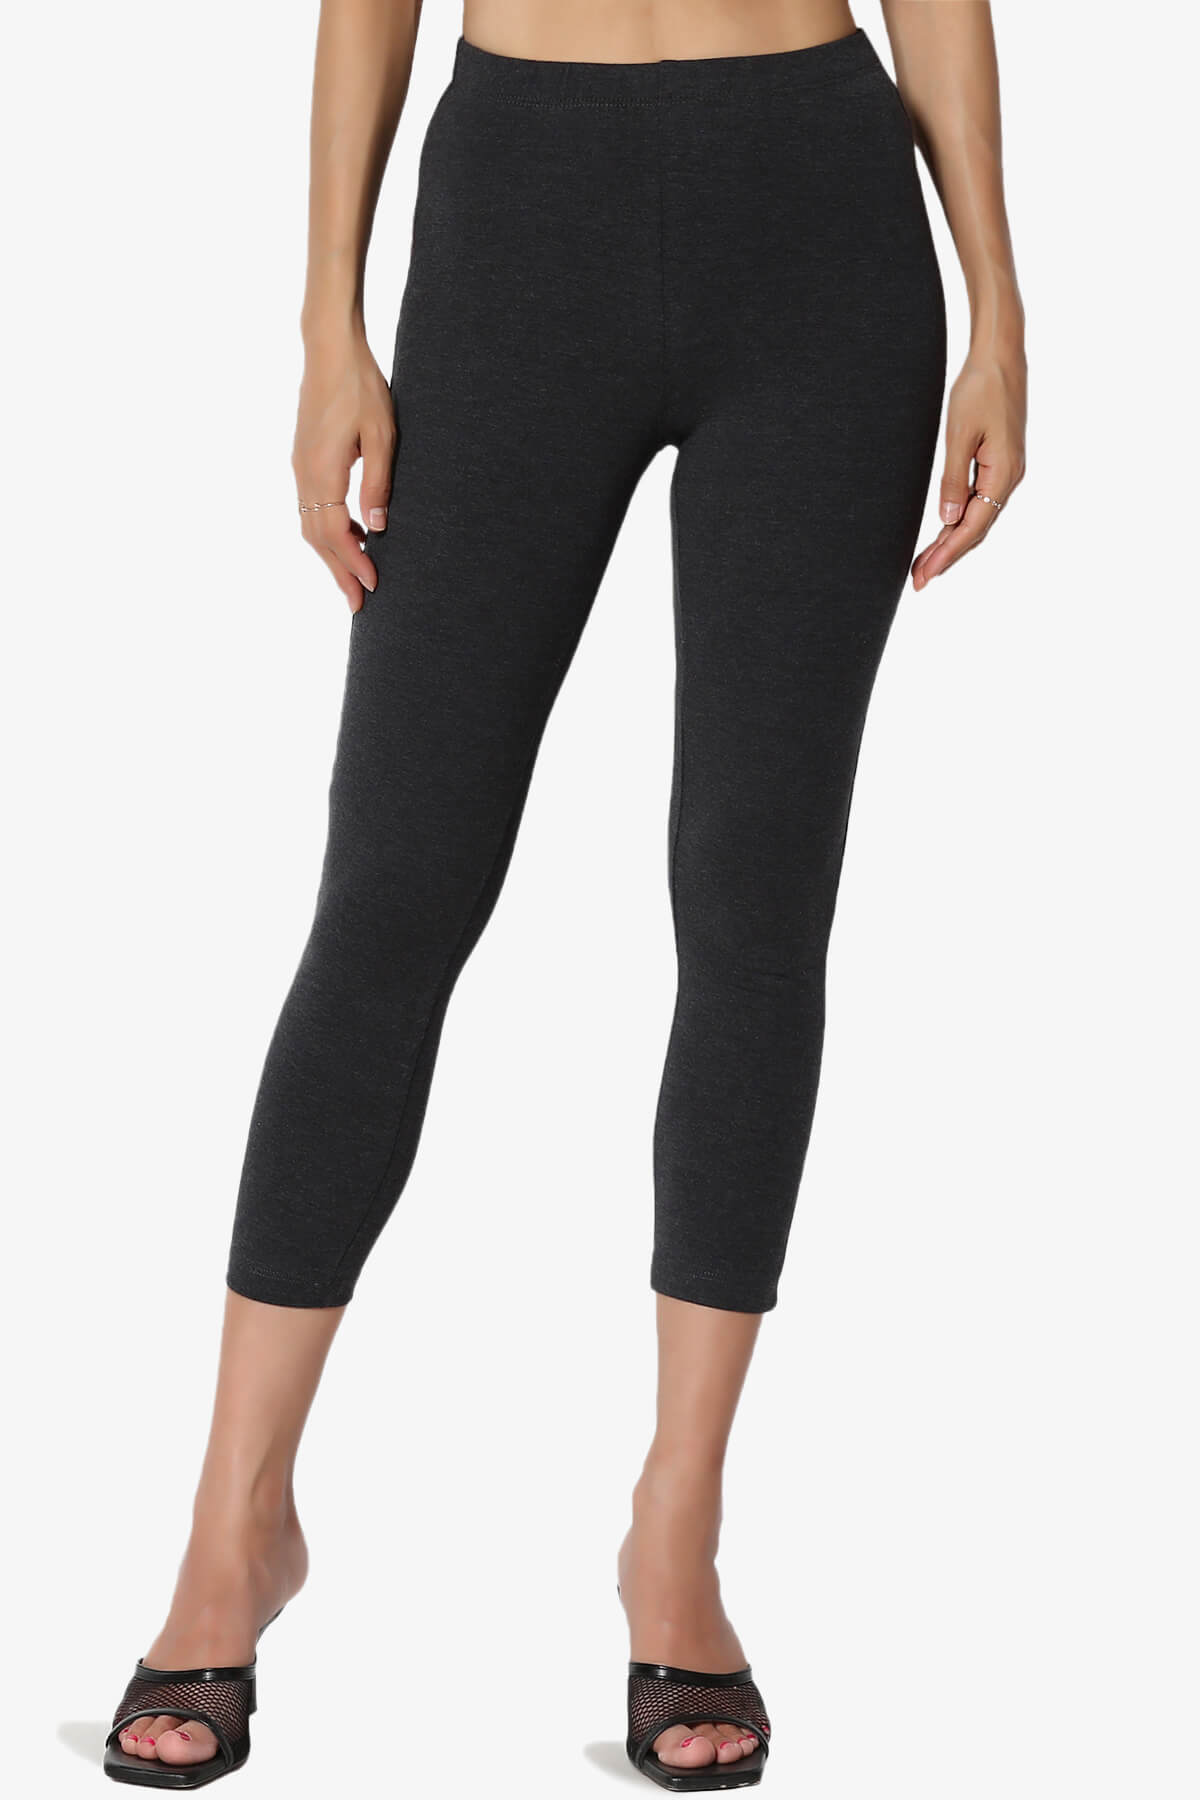 Load image into Gallery viewer, Ansley Luxe Cotton Capri Leggings CHARCOAL_1
